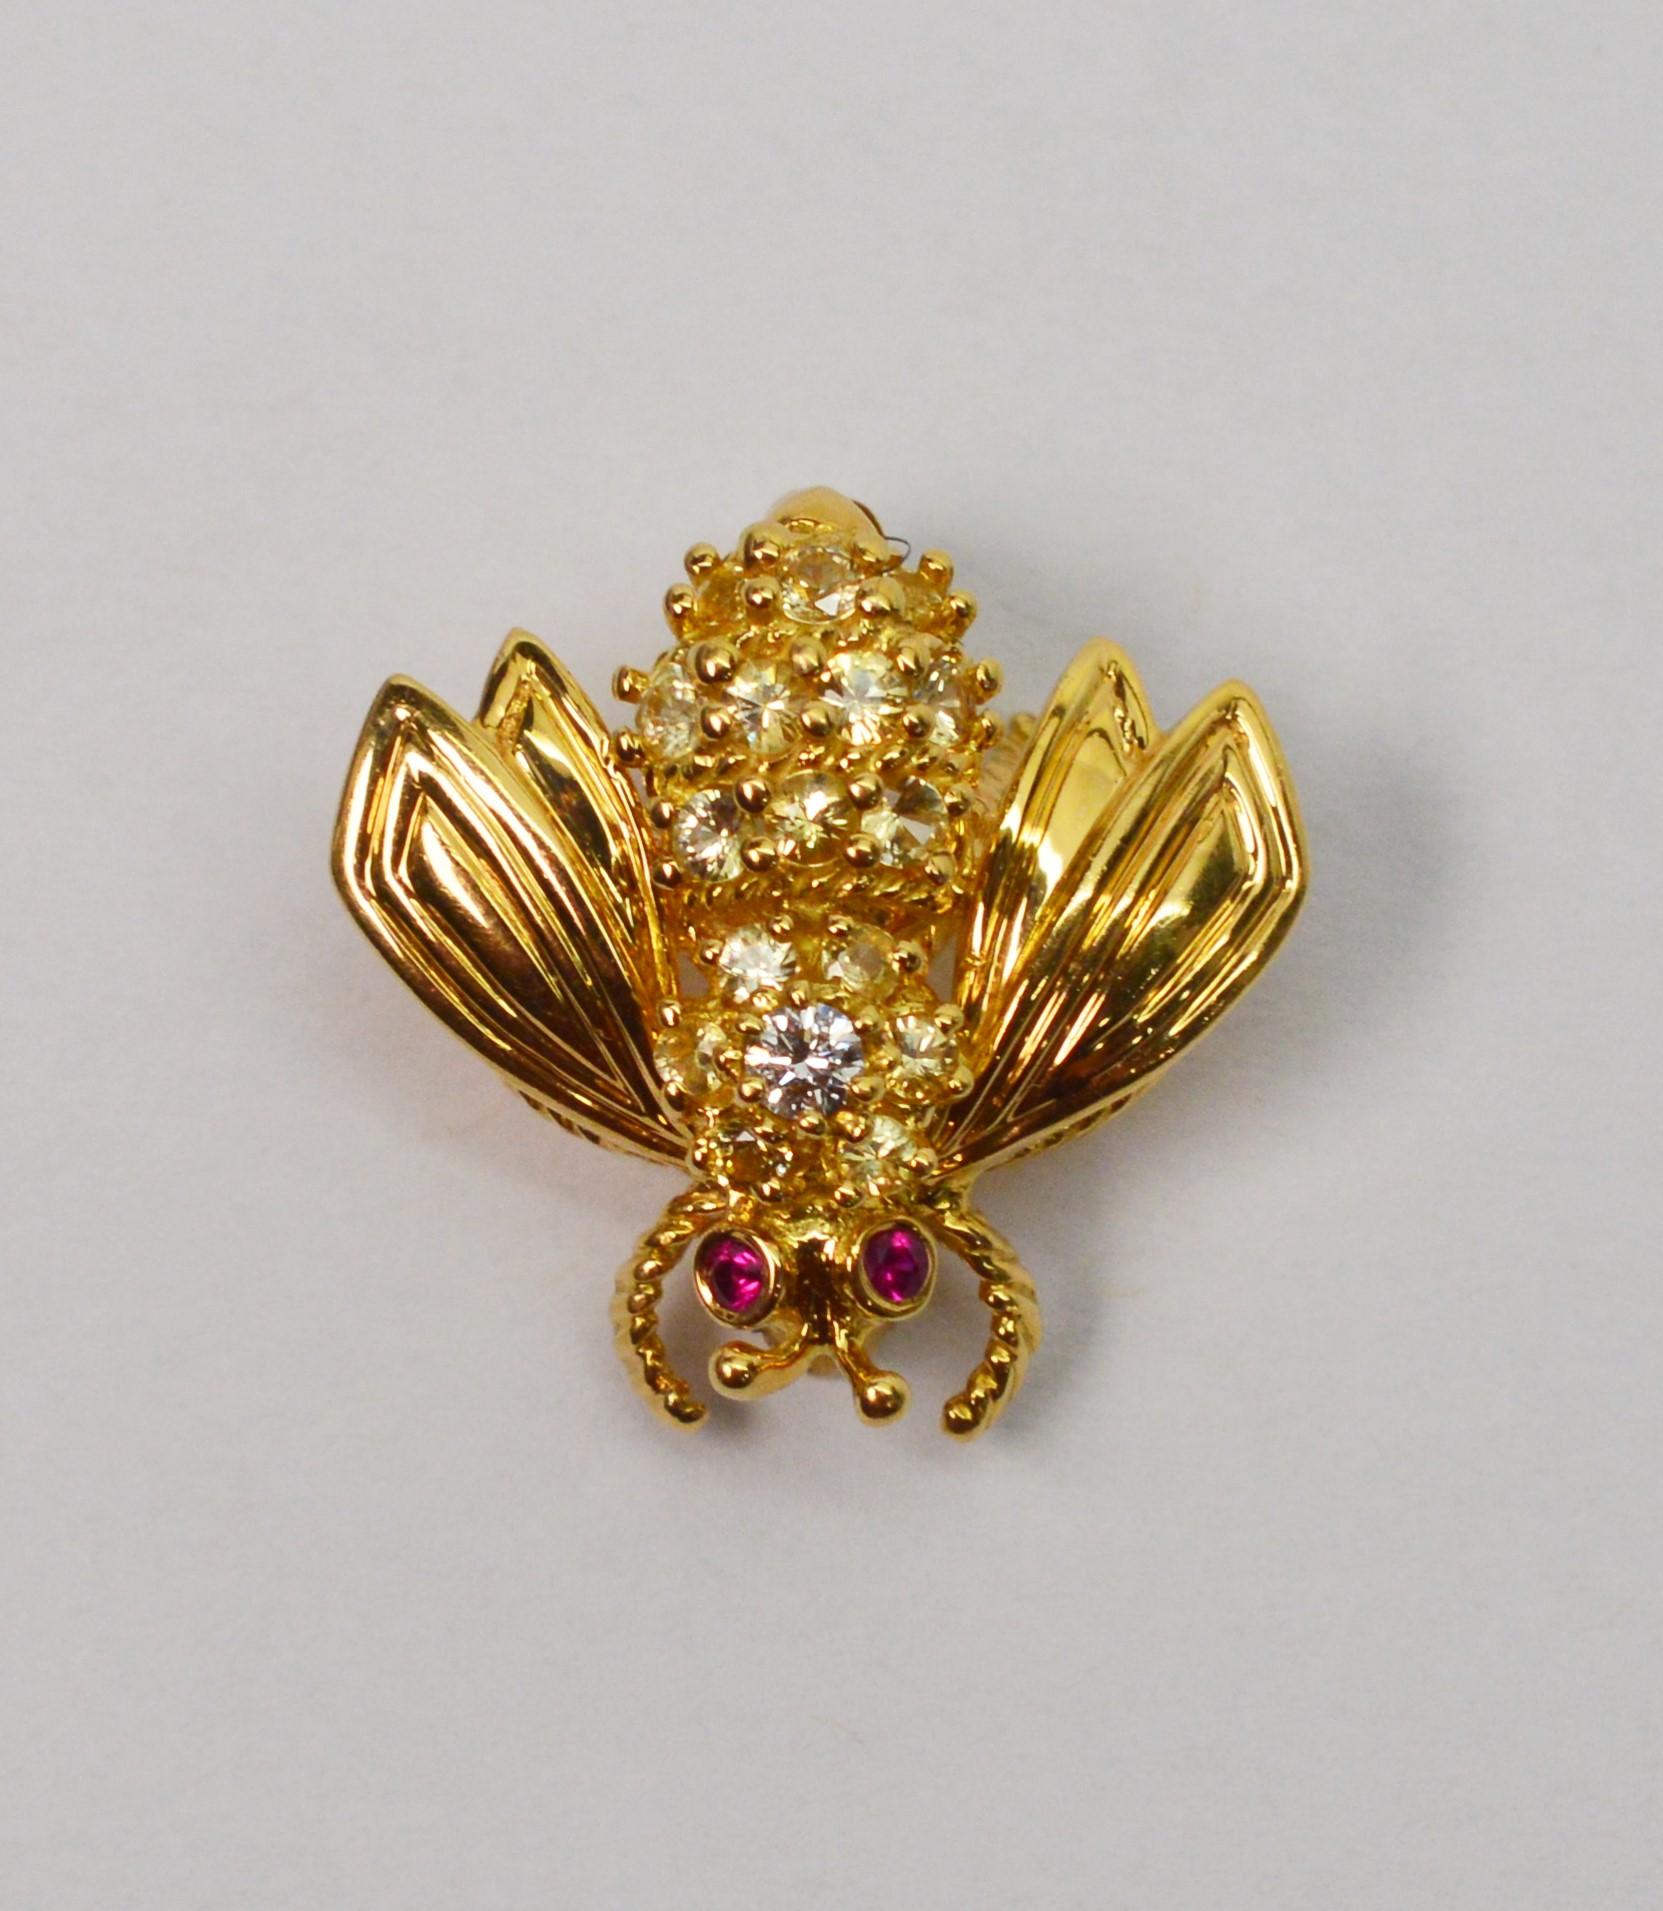 Adorable eighteen karat 18K yellow gold Tiffany & Company Bumble Bee Pin Brooch with diamond back and ruby eyes. Approximately -.75 carats.
Mint condition. Measures Approximately 3/4 inch long and about the same wing to wing.